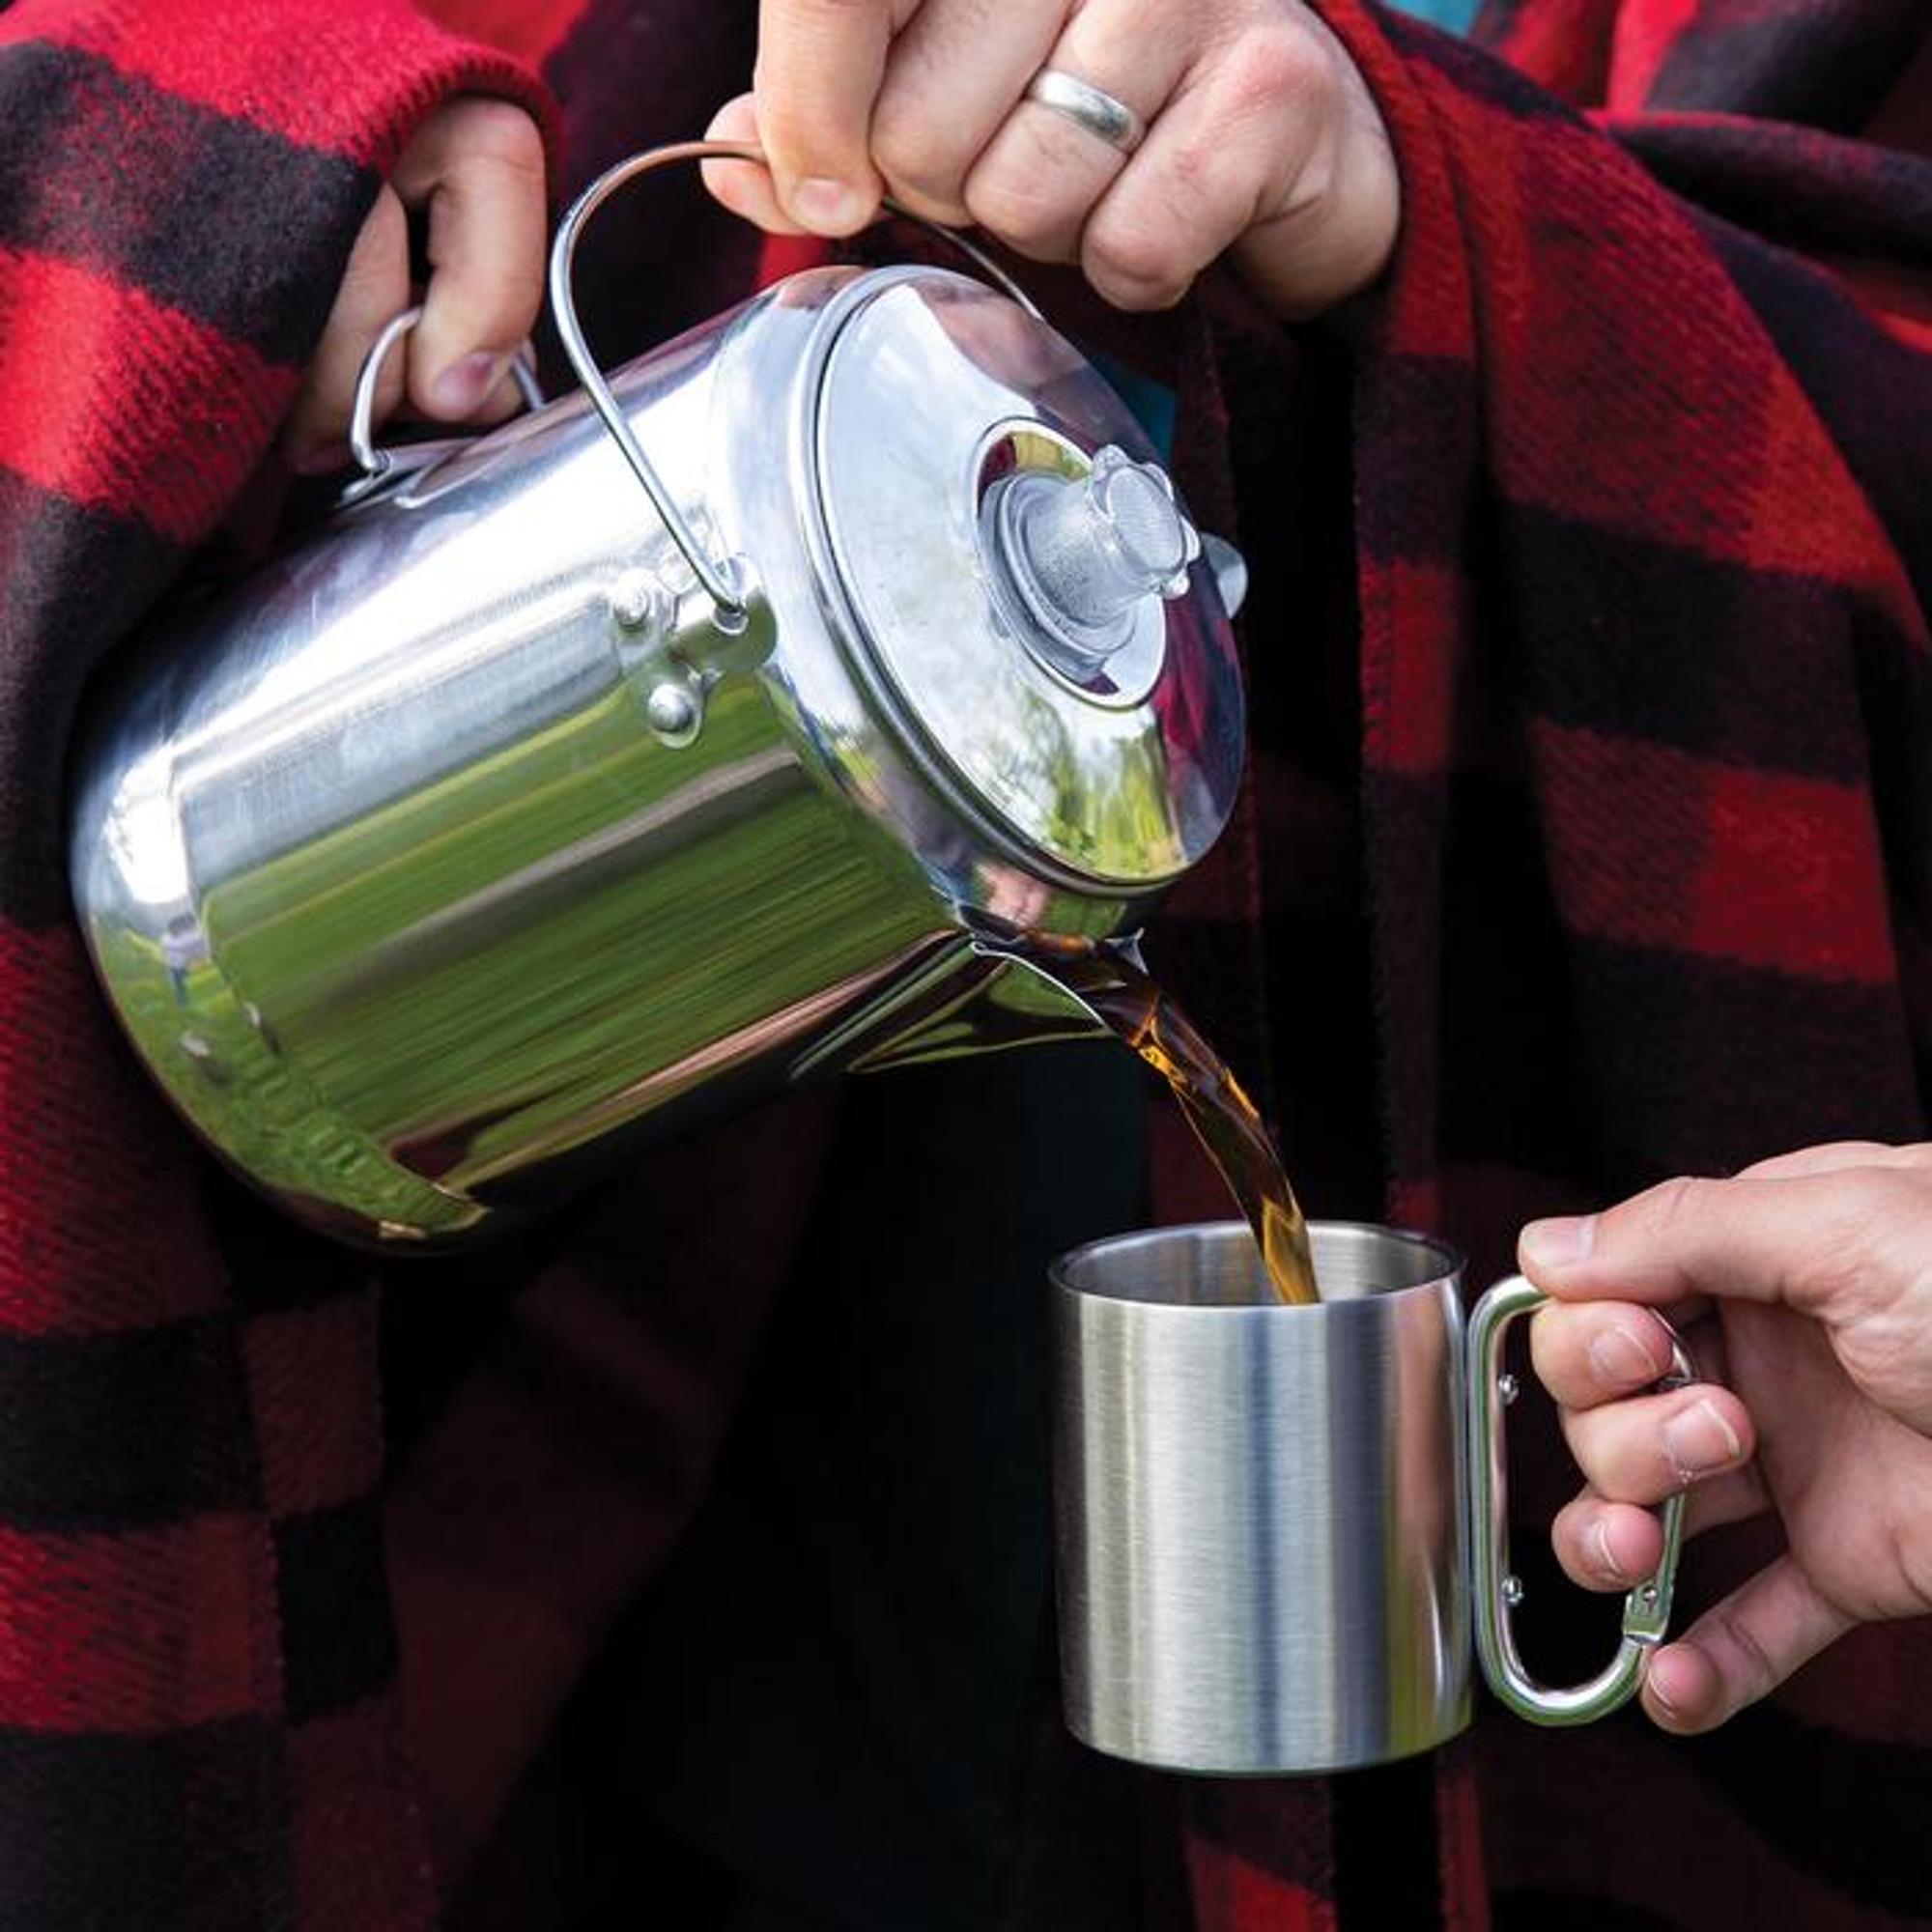 Coffee Percolator And Mugs Kit - Perfect For Camping, Sturdy Construction, Rust-Resistant